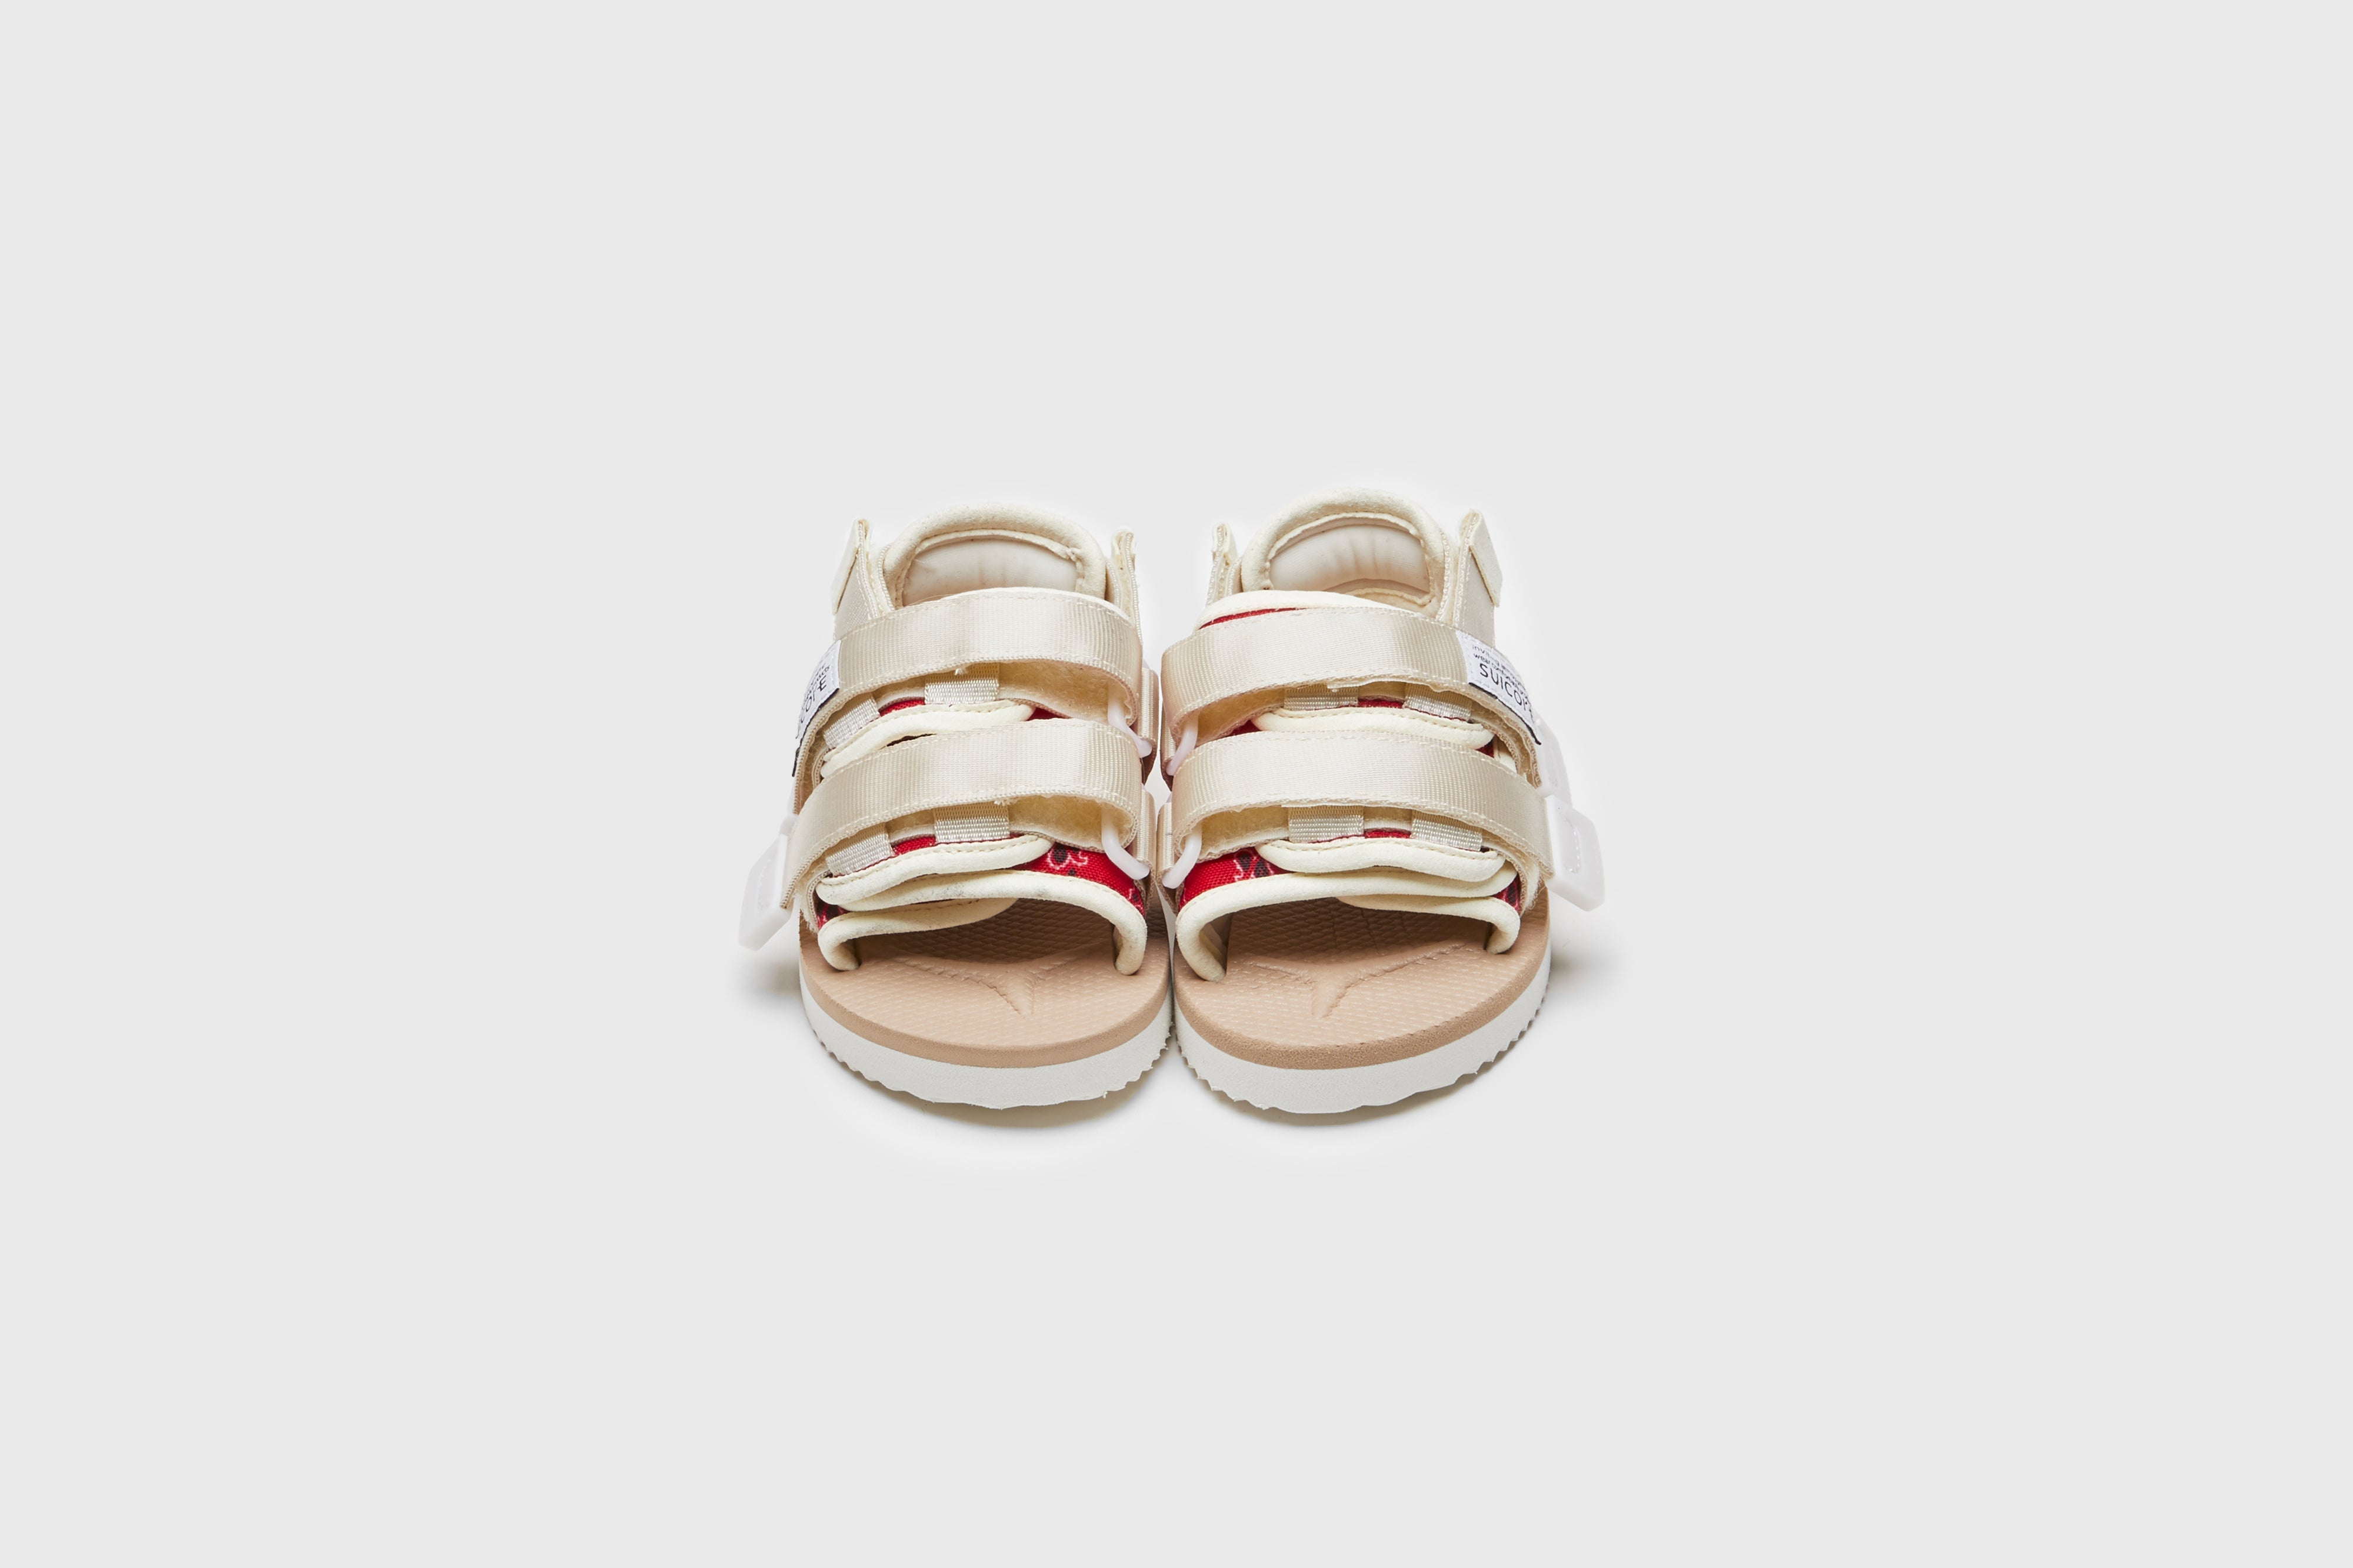 SUICOKE MOTO-2kids-PT05 slides with red &amp; beige nylon upper, red &amp; beige midsole and sole, strap and logo patch. From Spring/Summer 2023 collection on eightywingold Web Store, an official partner of SUICOKE. OG-056-2KIDS-PT05 RED X BEIGE